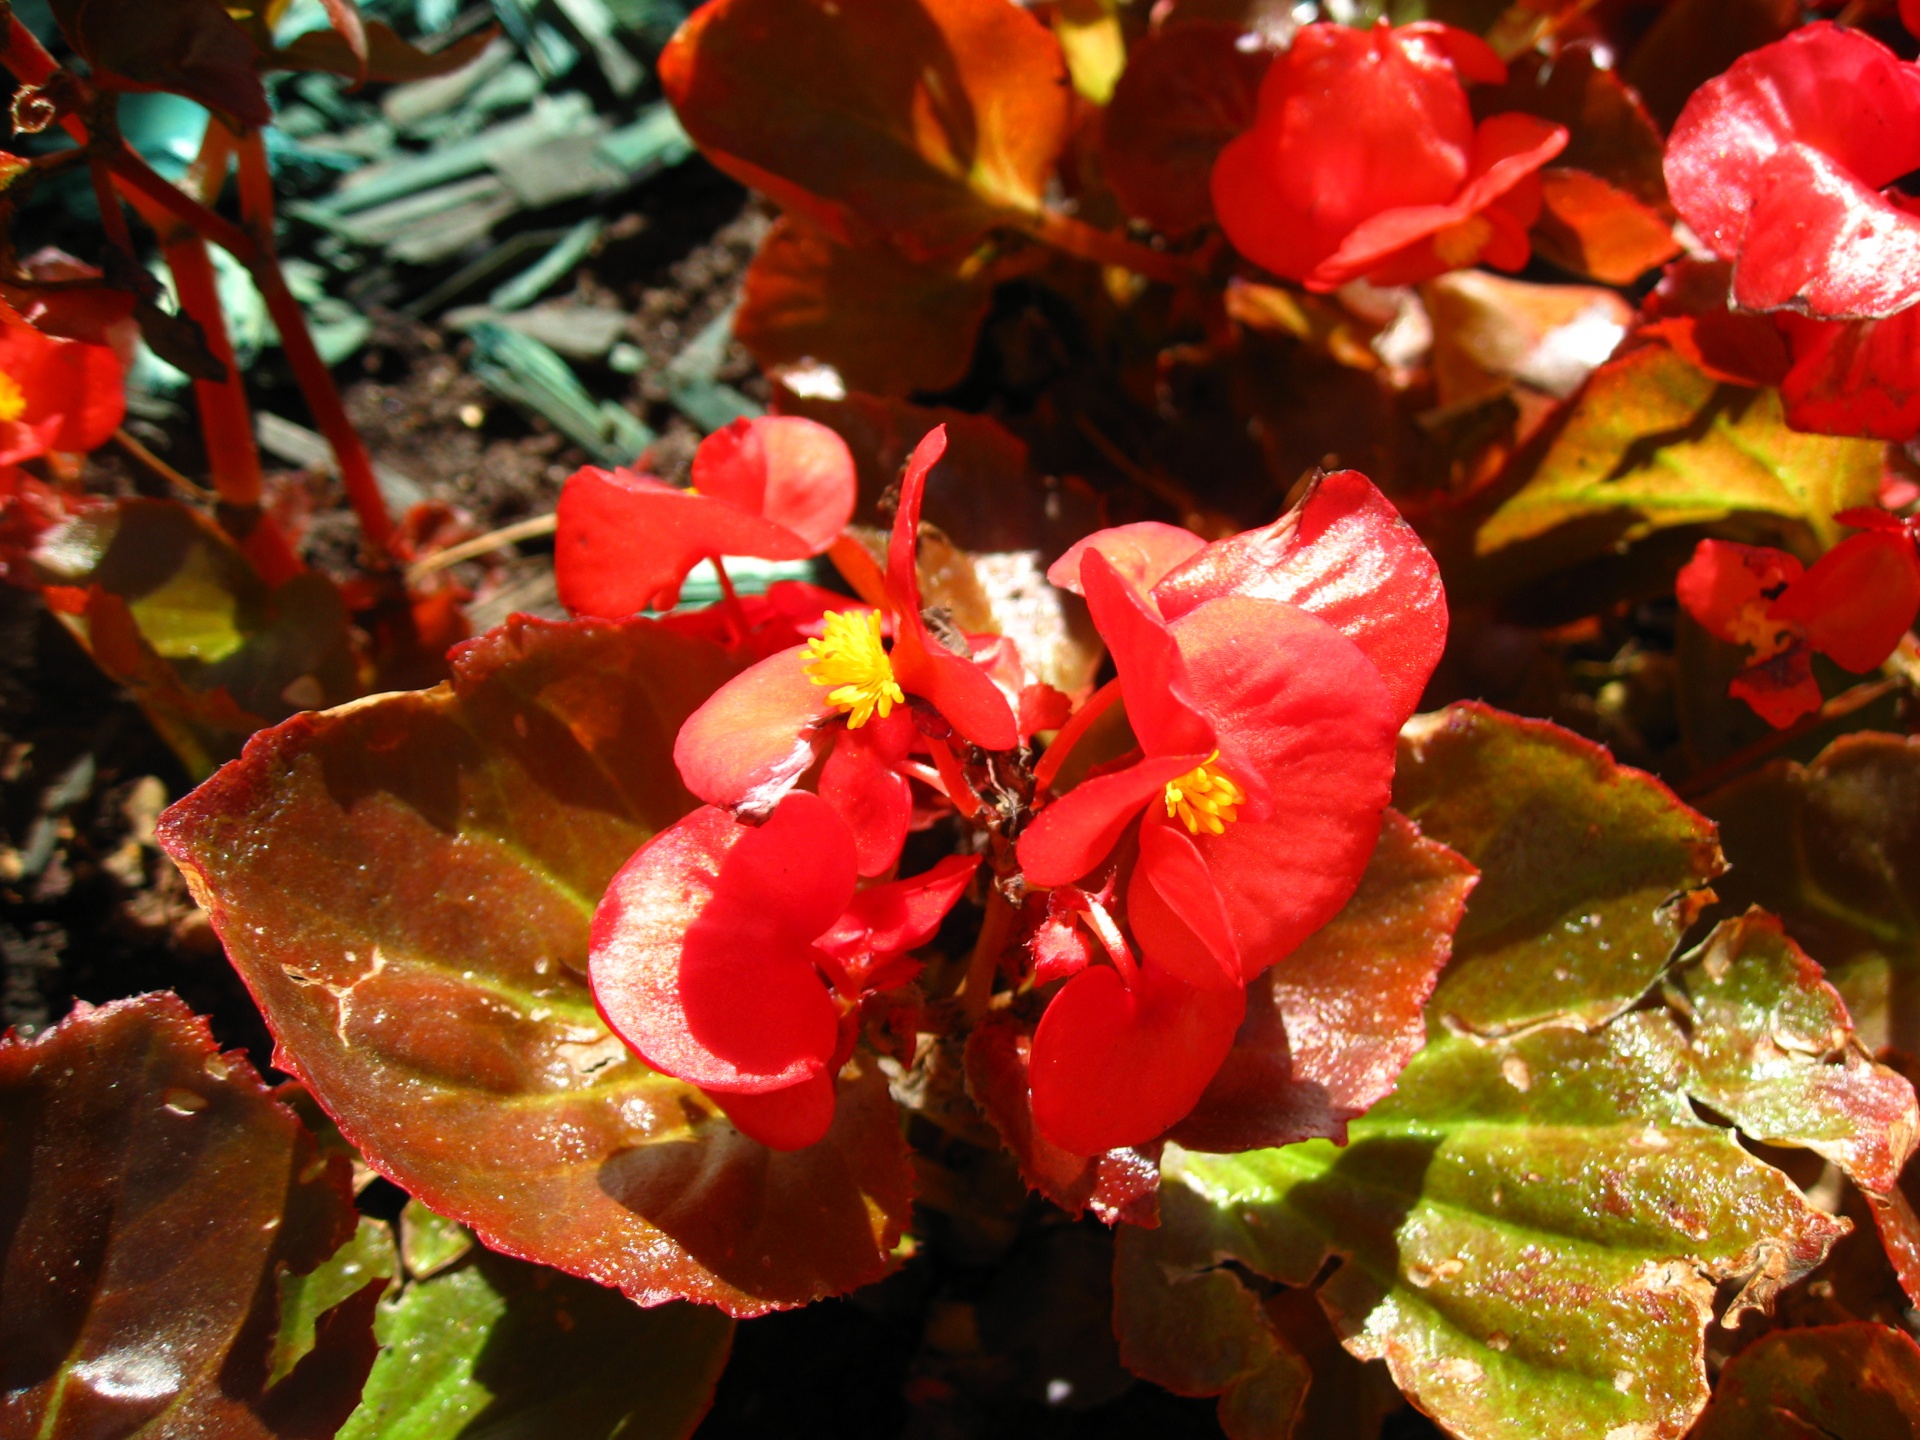 A photograph of the flowers of begonia. Author - Печкарева Ирина